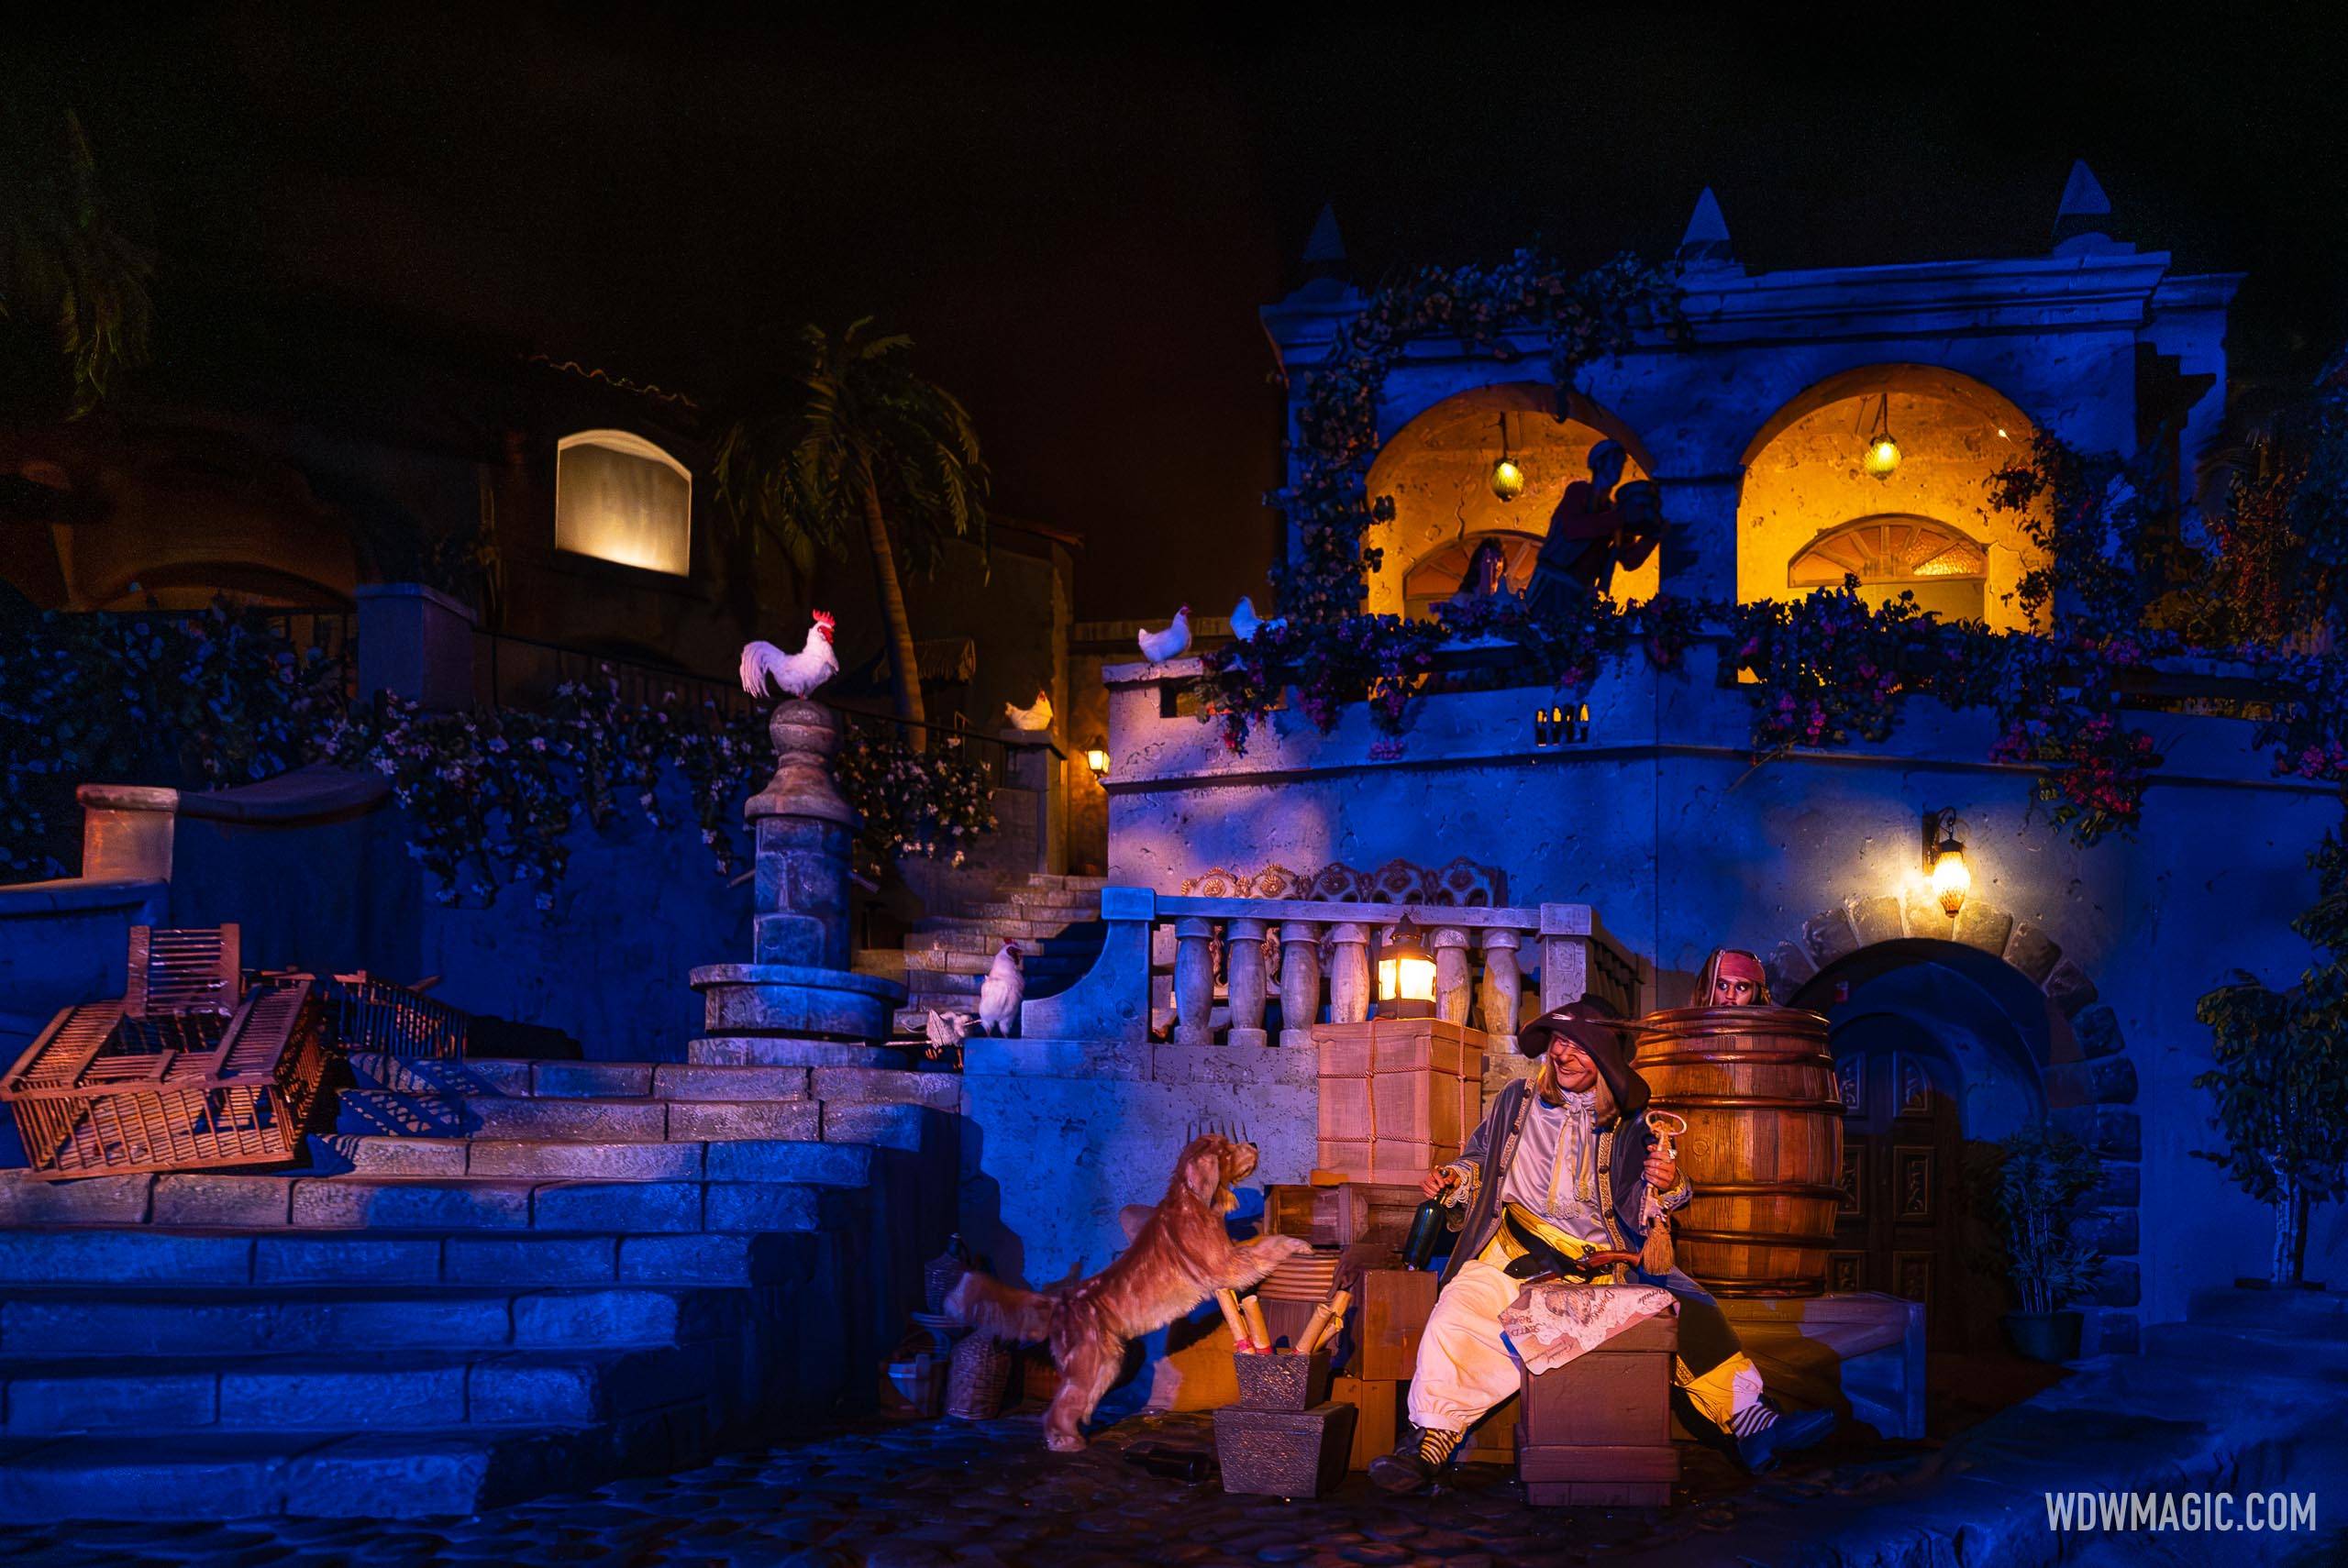 Pirates of the Caribbean refurbishment to begin later than originally planned